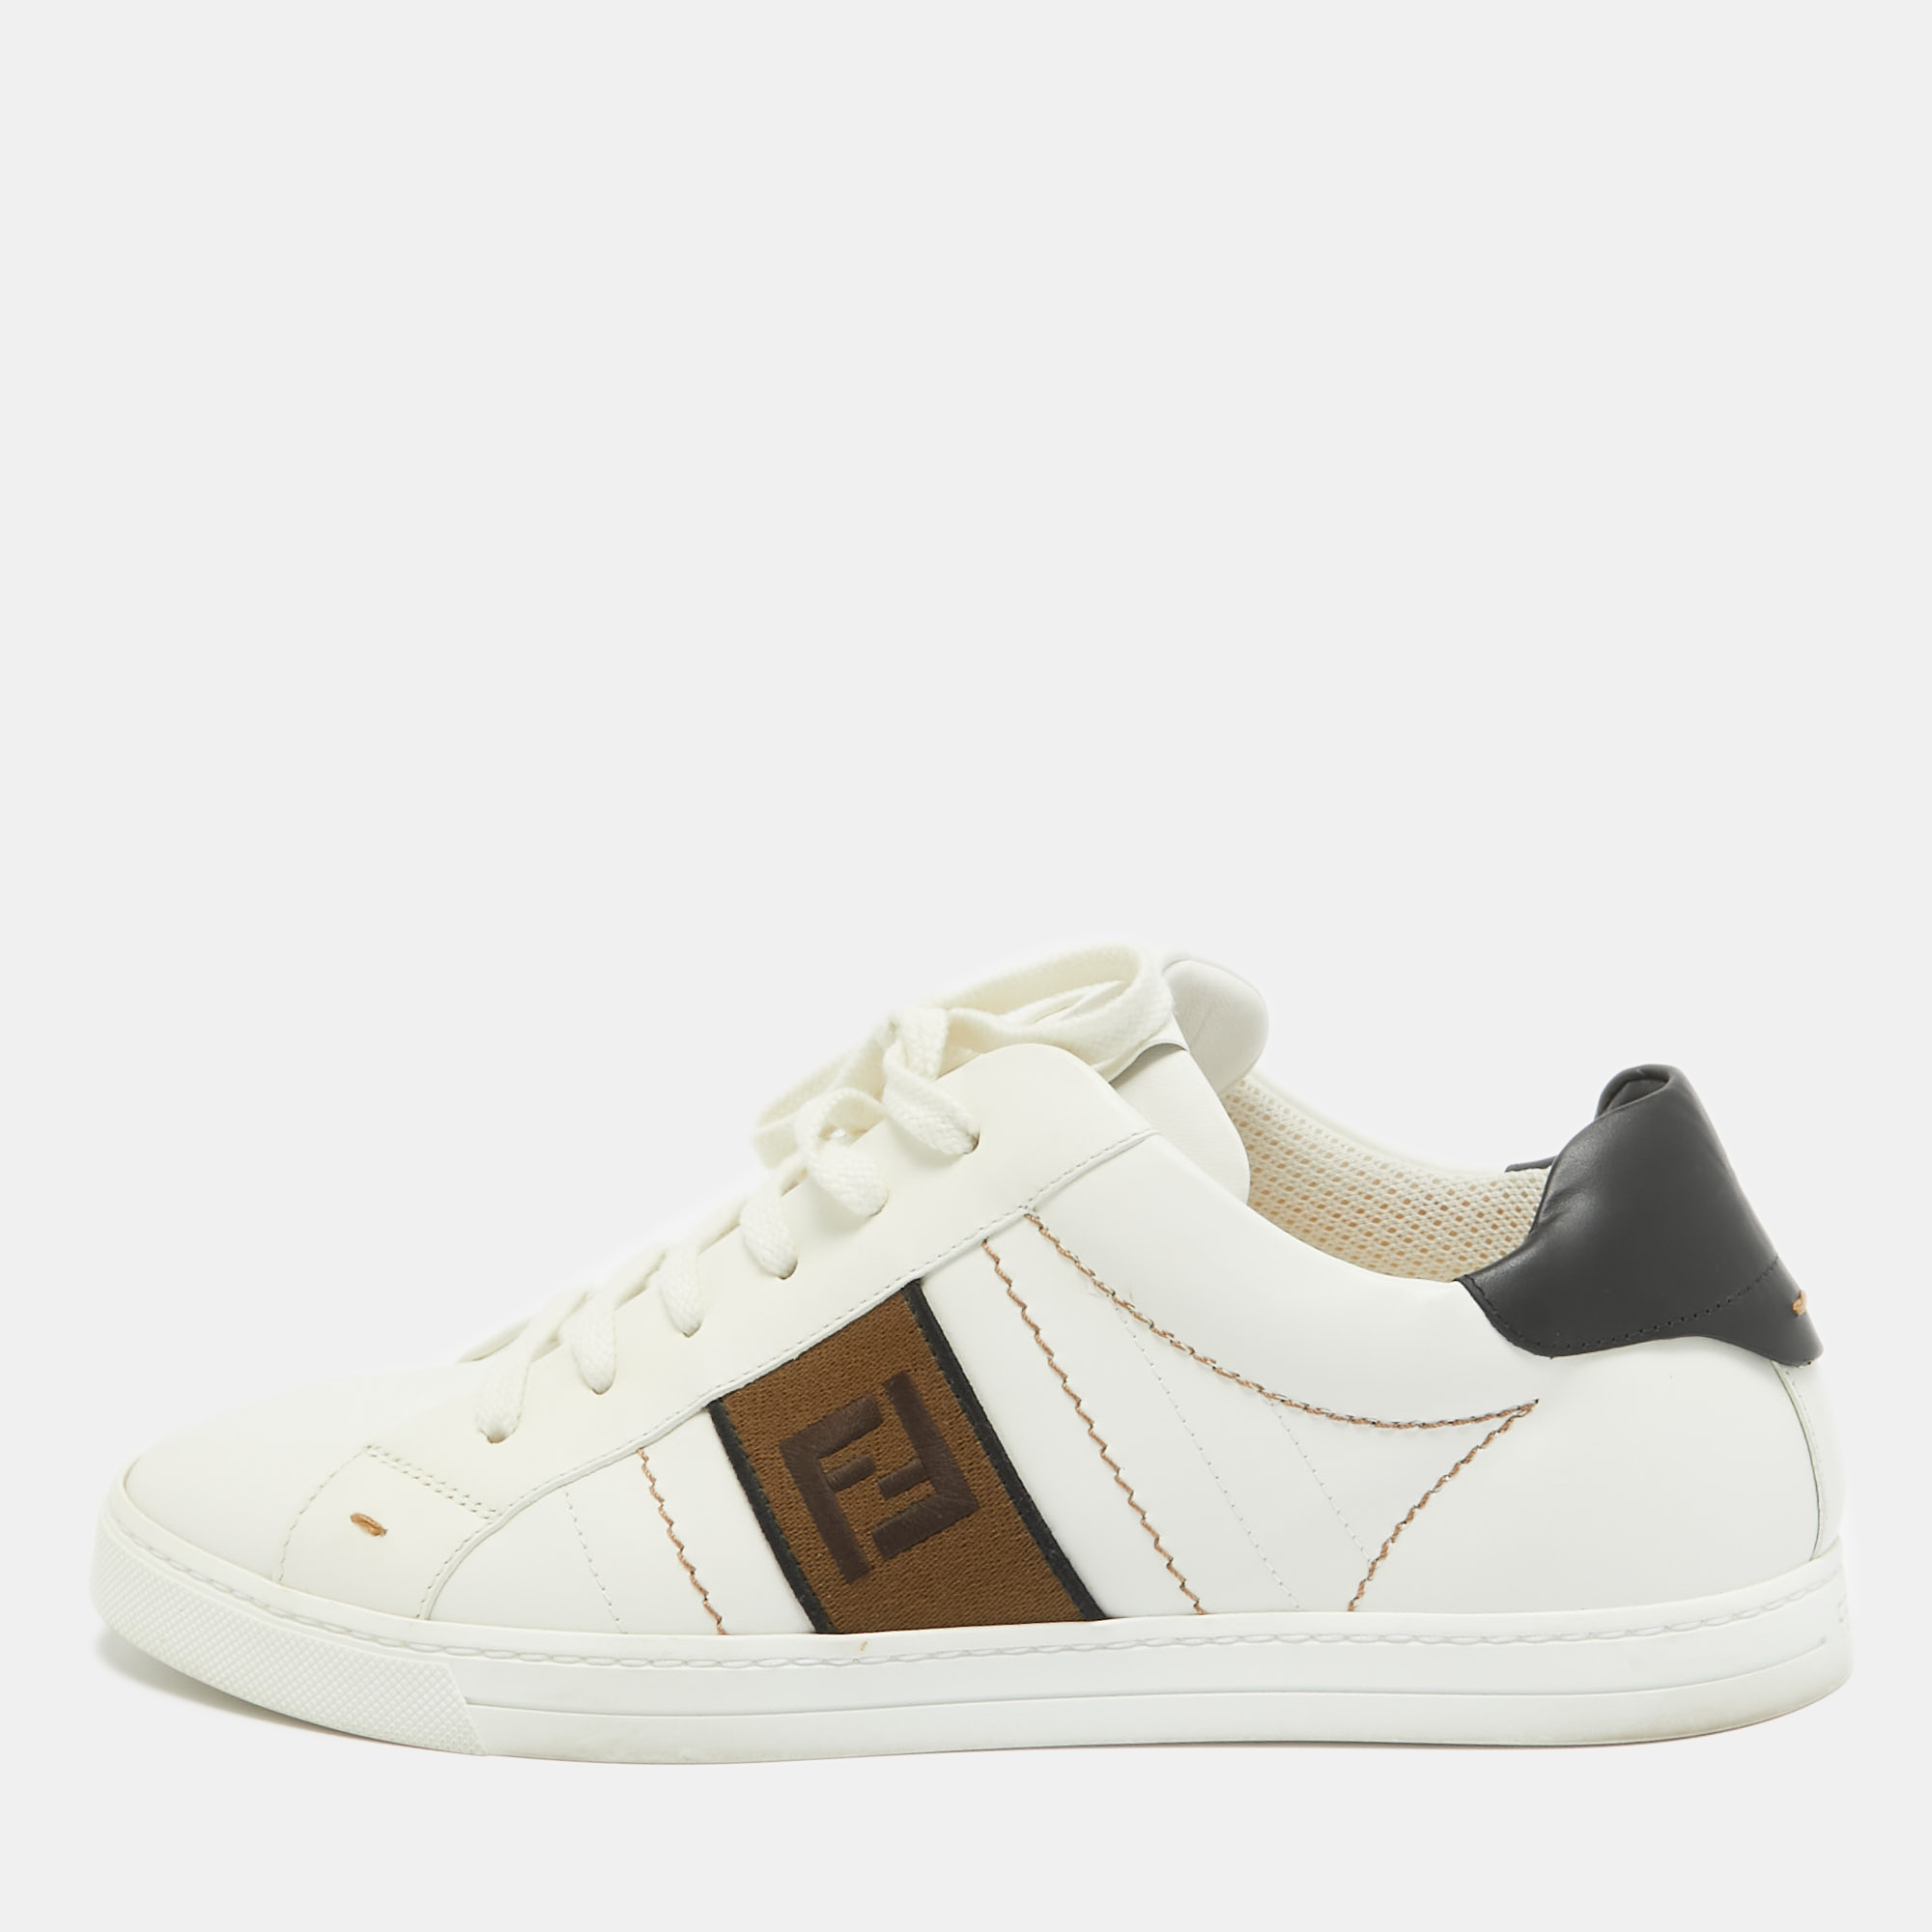 Fendi white/black leather low top sneakers size 41